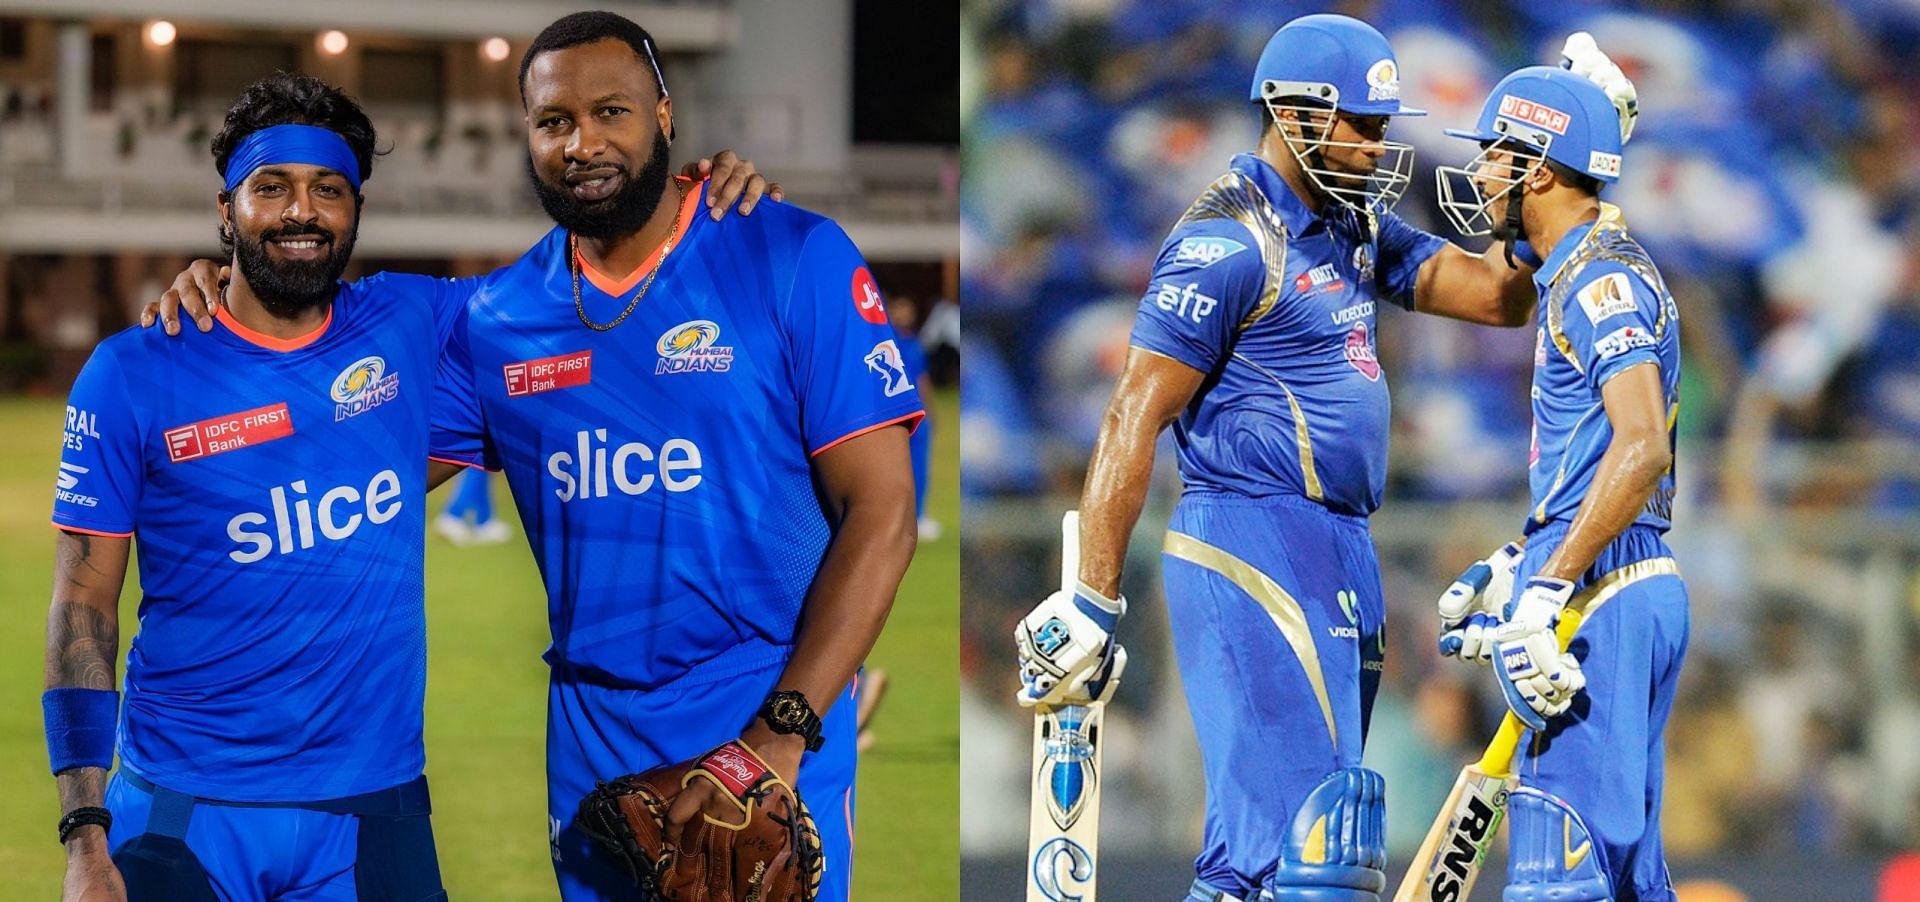 Mumbai Indians skipper Hardik Pandya has come up with an emotional post about reuniting with former all-rounder and current batting coach Kieron Pollard